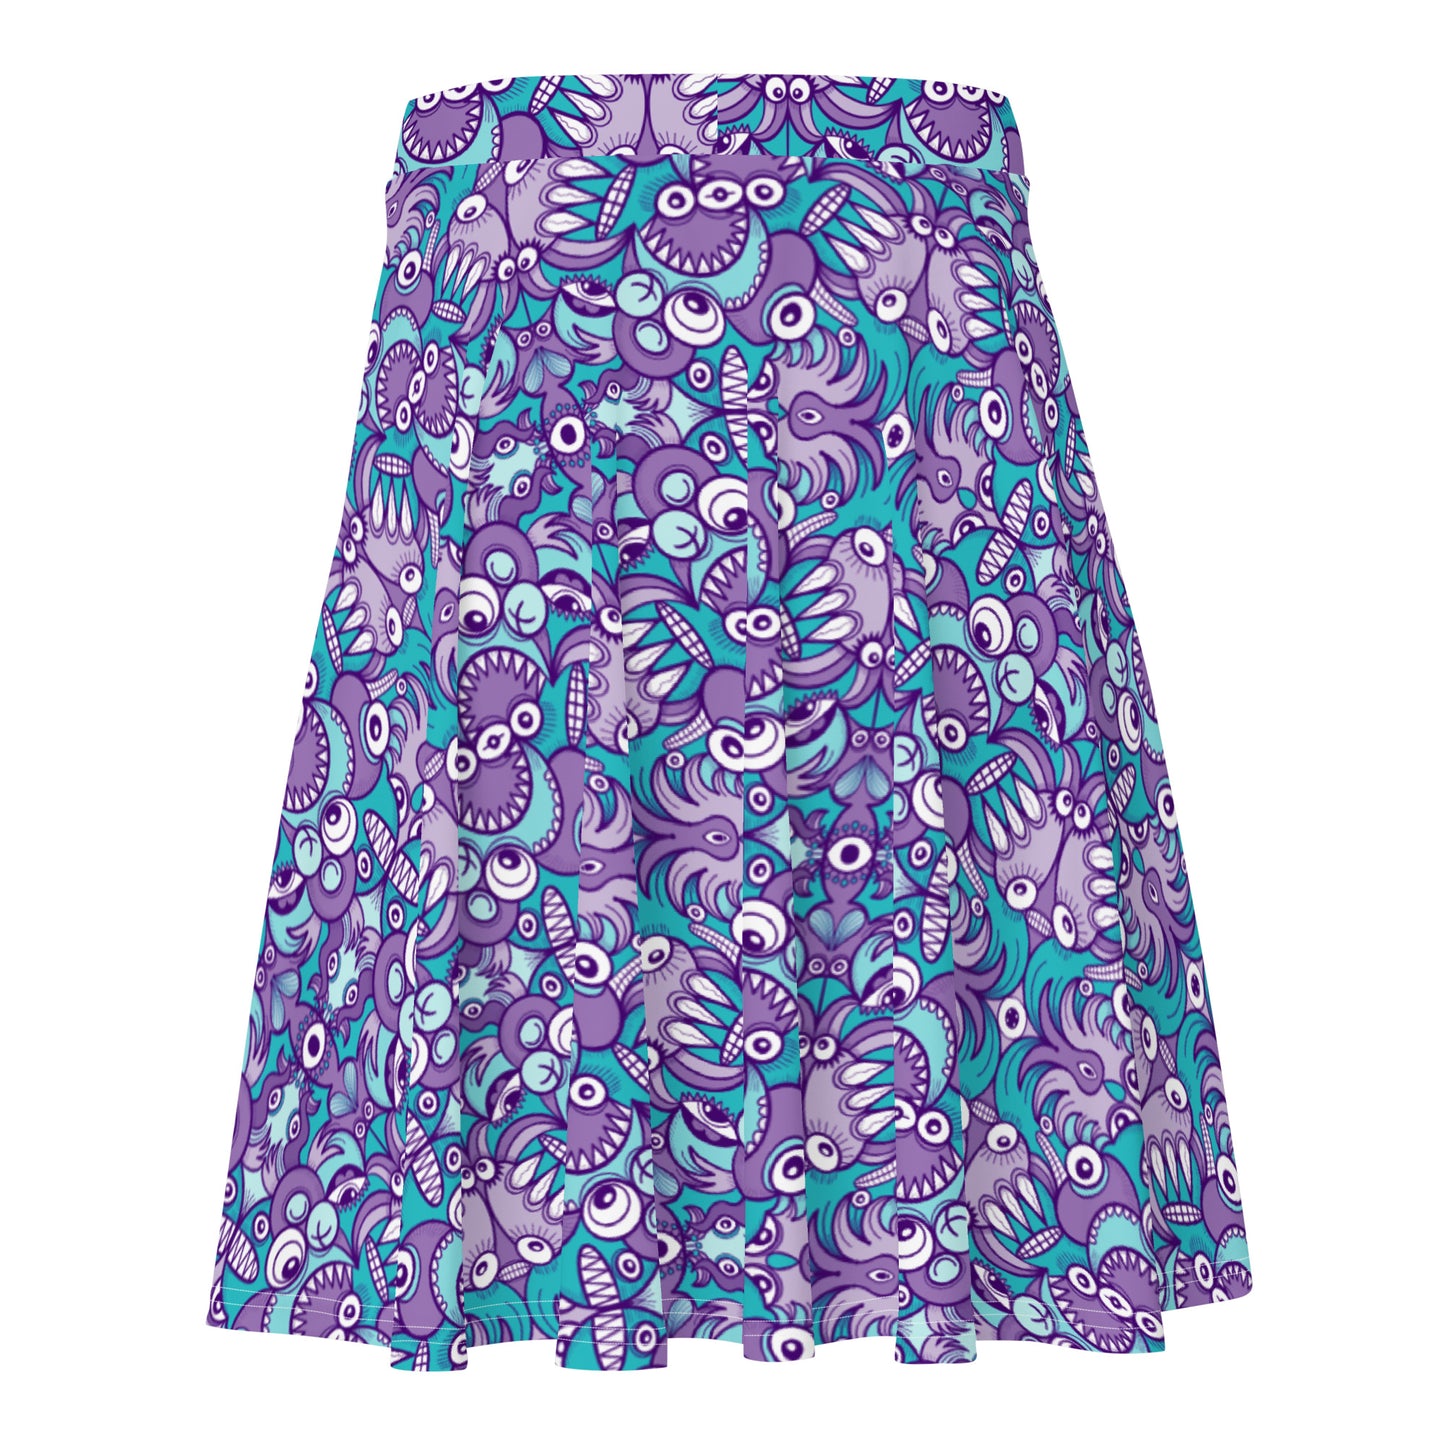 Planet 5: Aquatic Creatures from the Doodles of the Galaxy - Skater Skirt